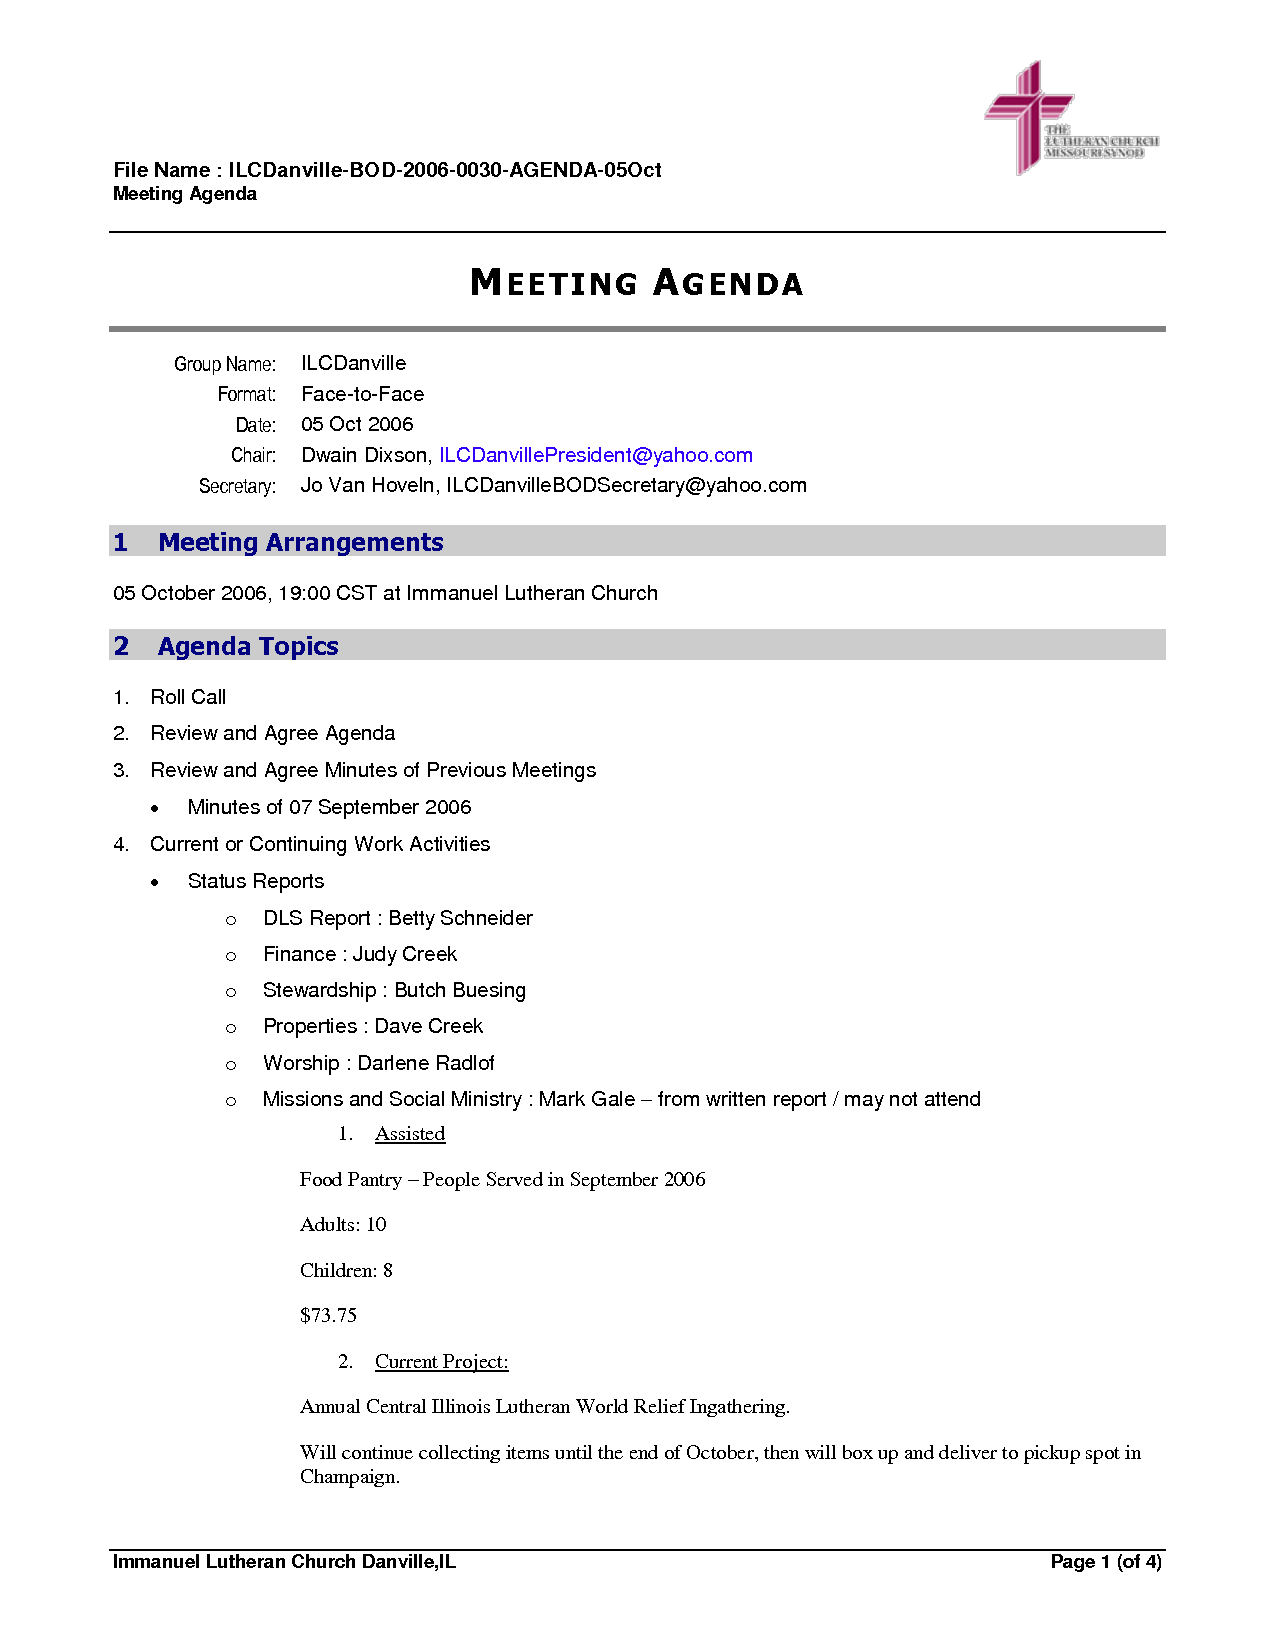 Church Business Meeting Minutes Template from legaldbol.com